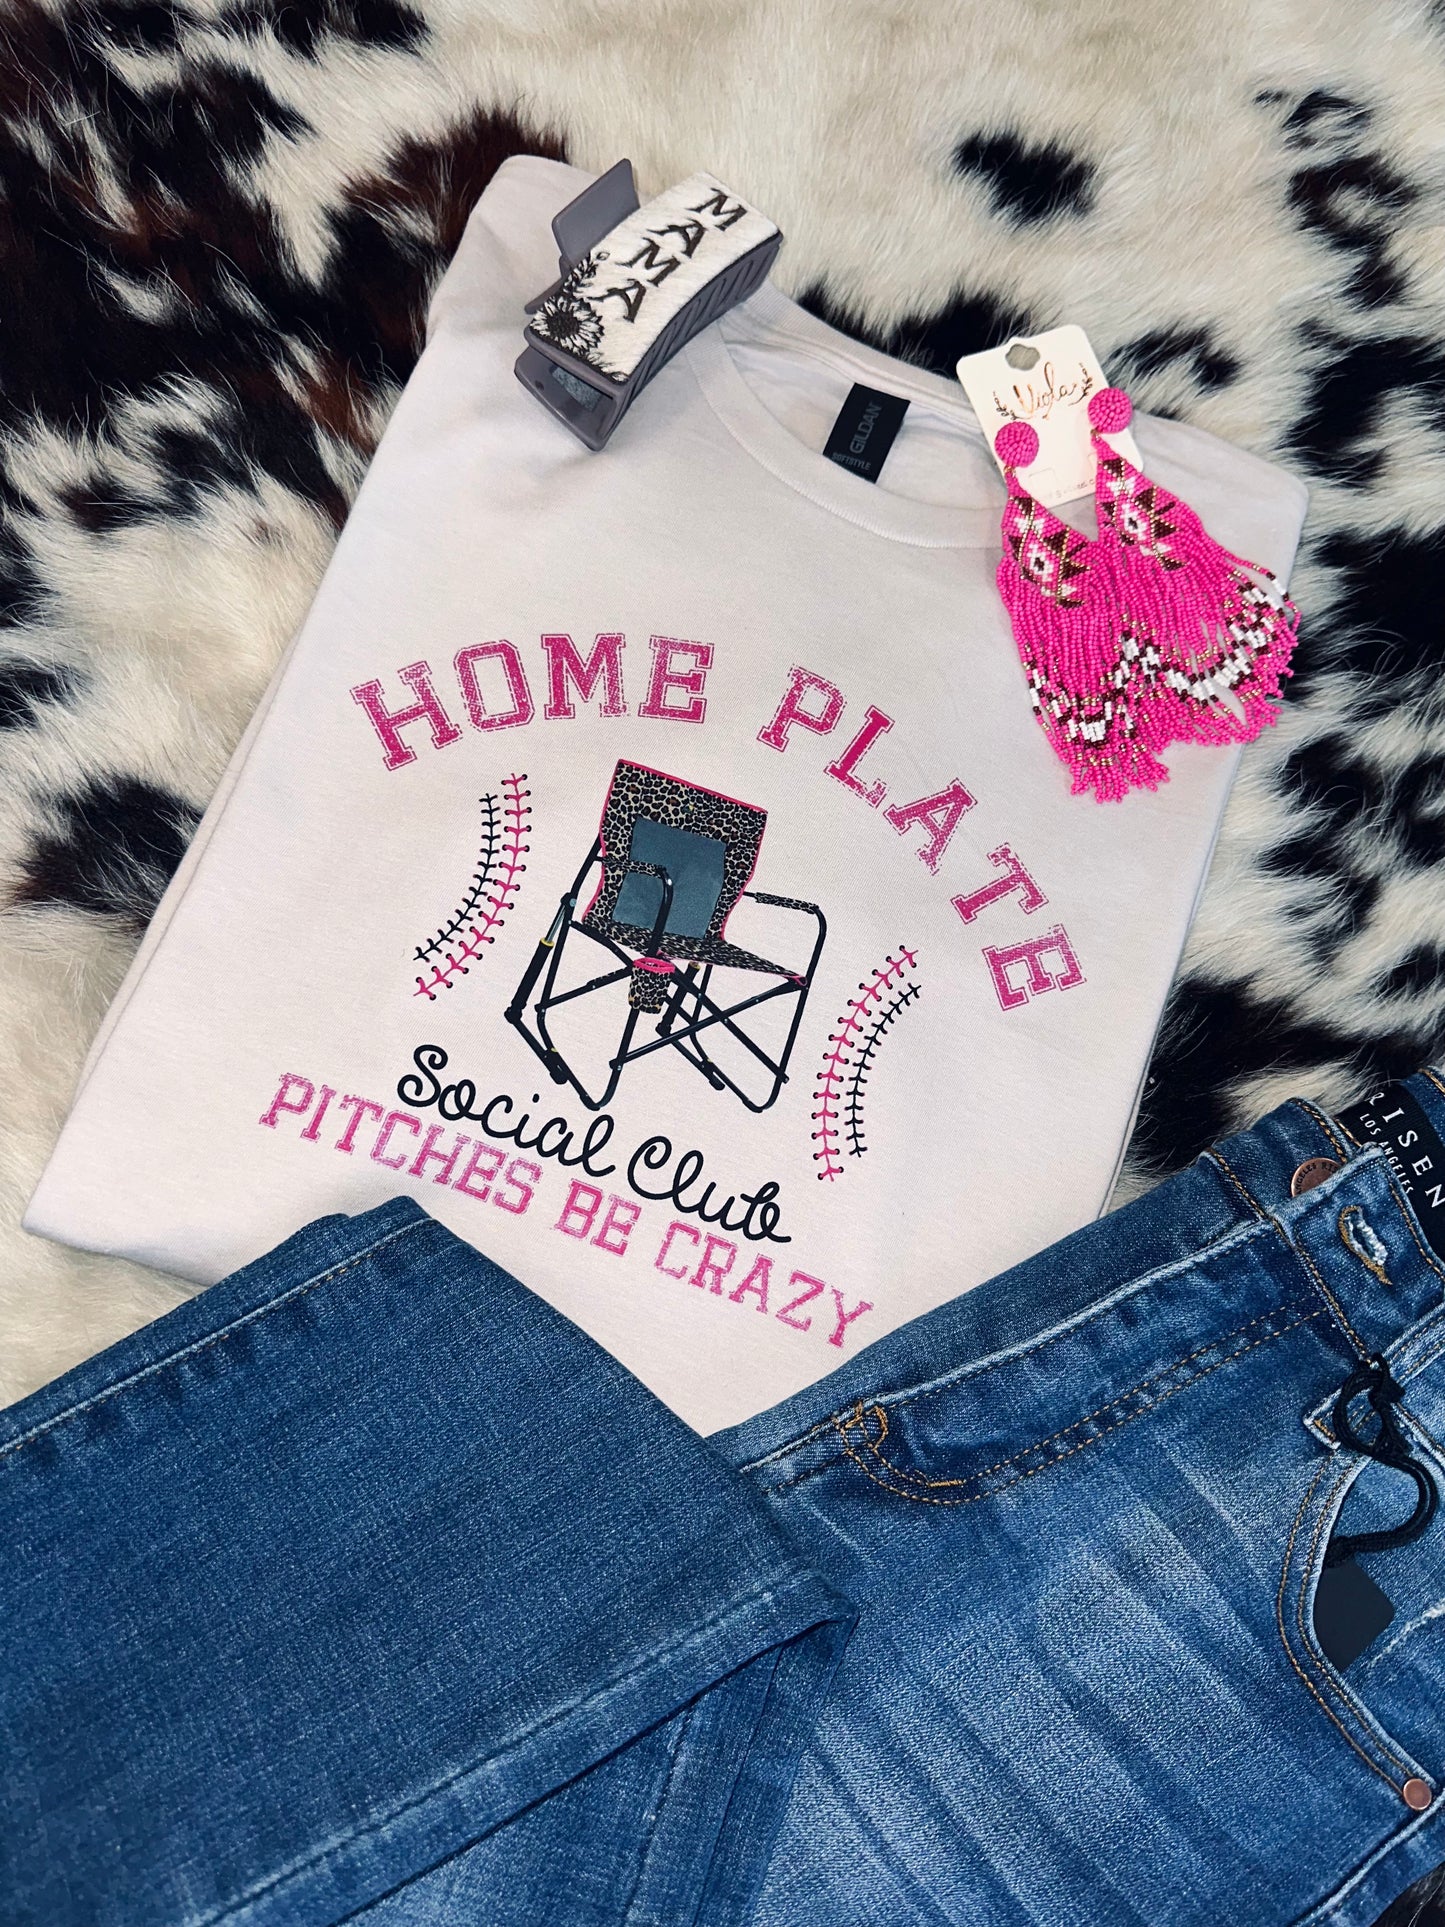 Pink Home Plate Pitches Be Crazy - Tee